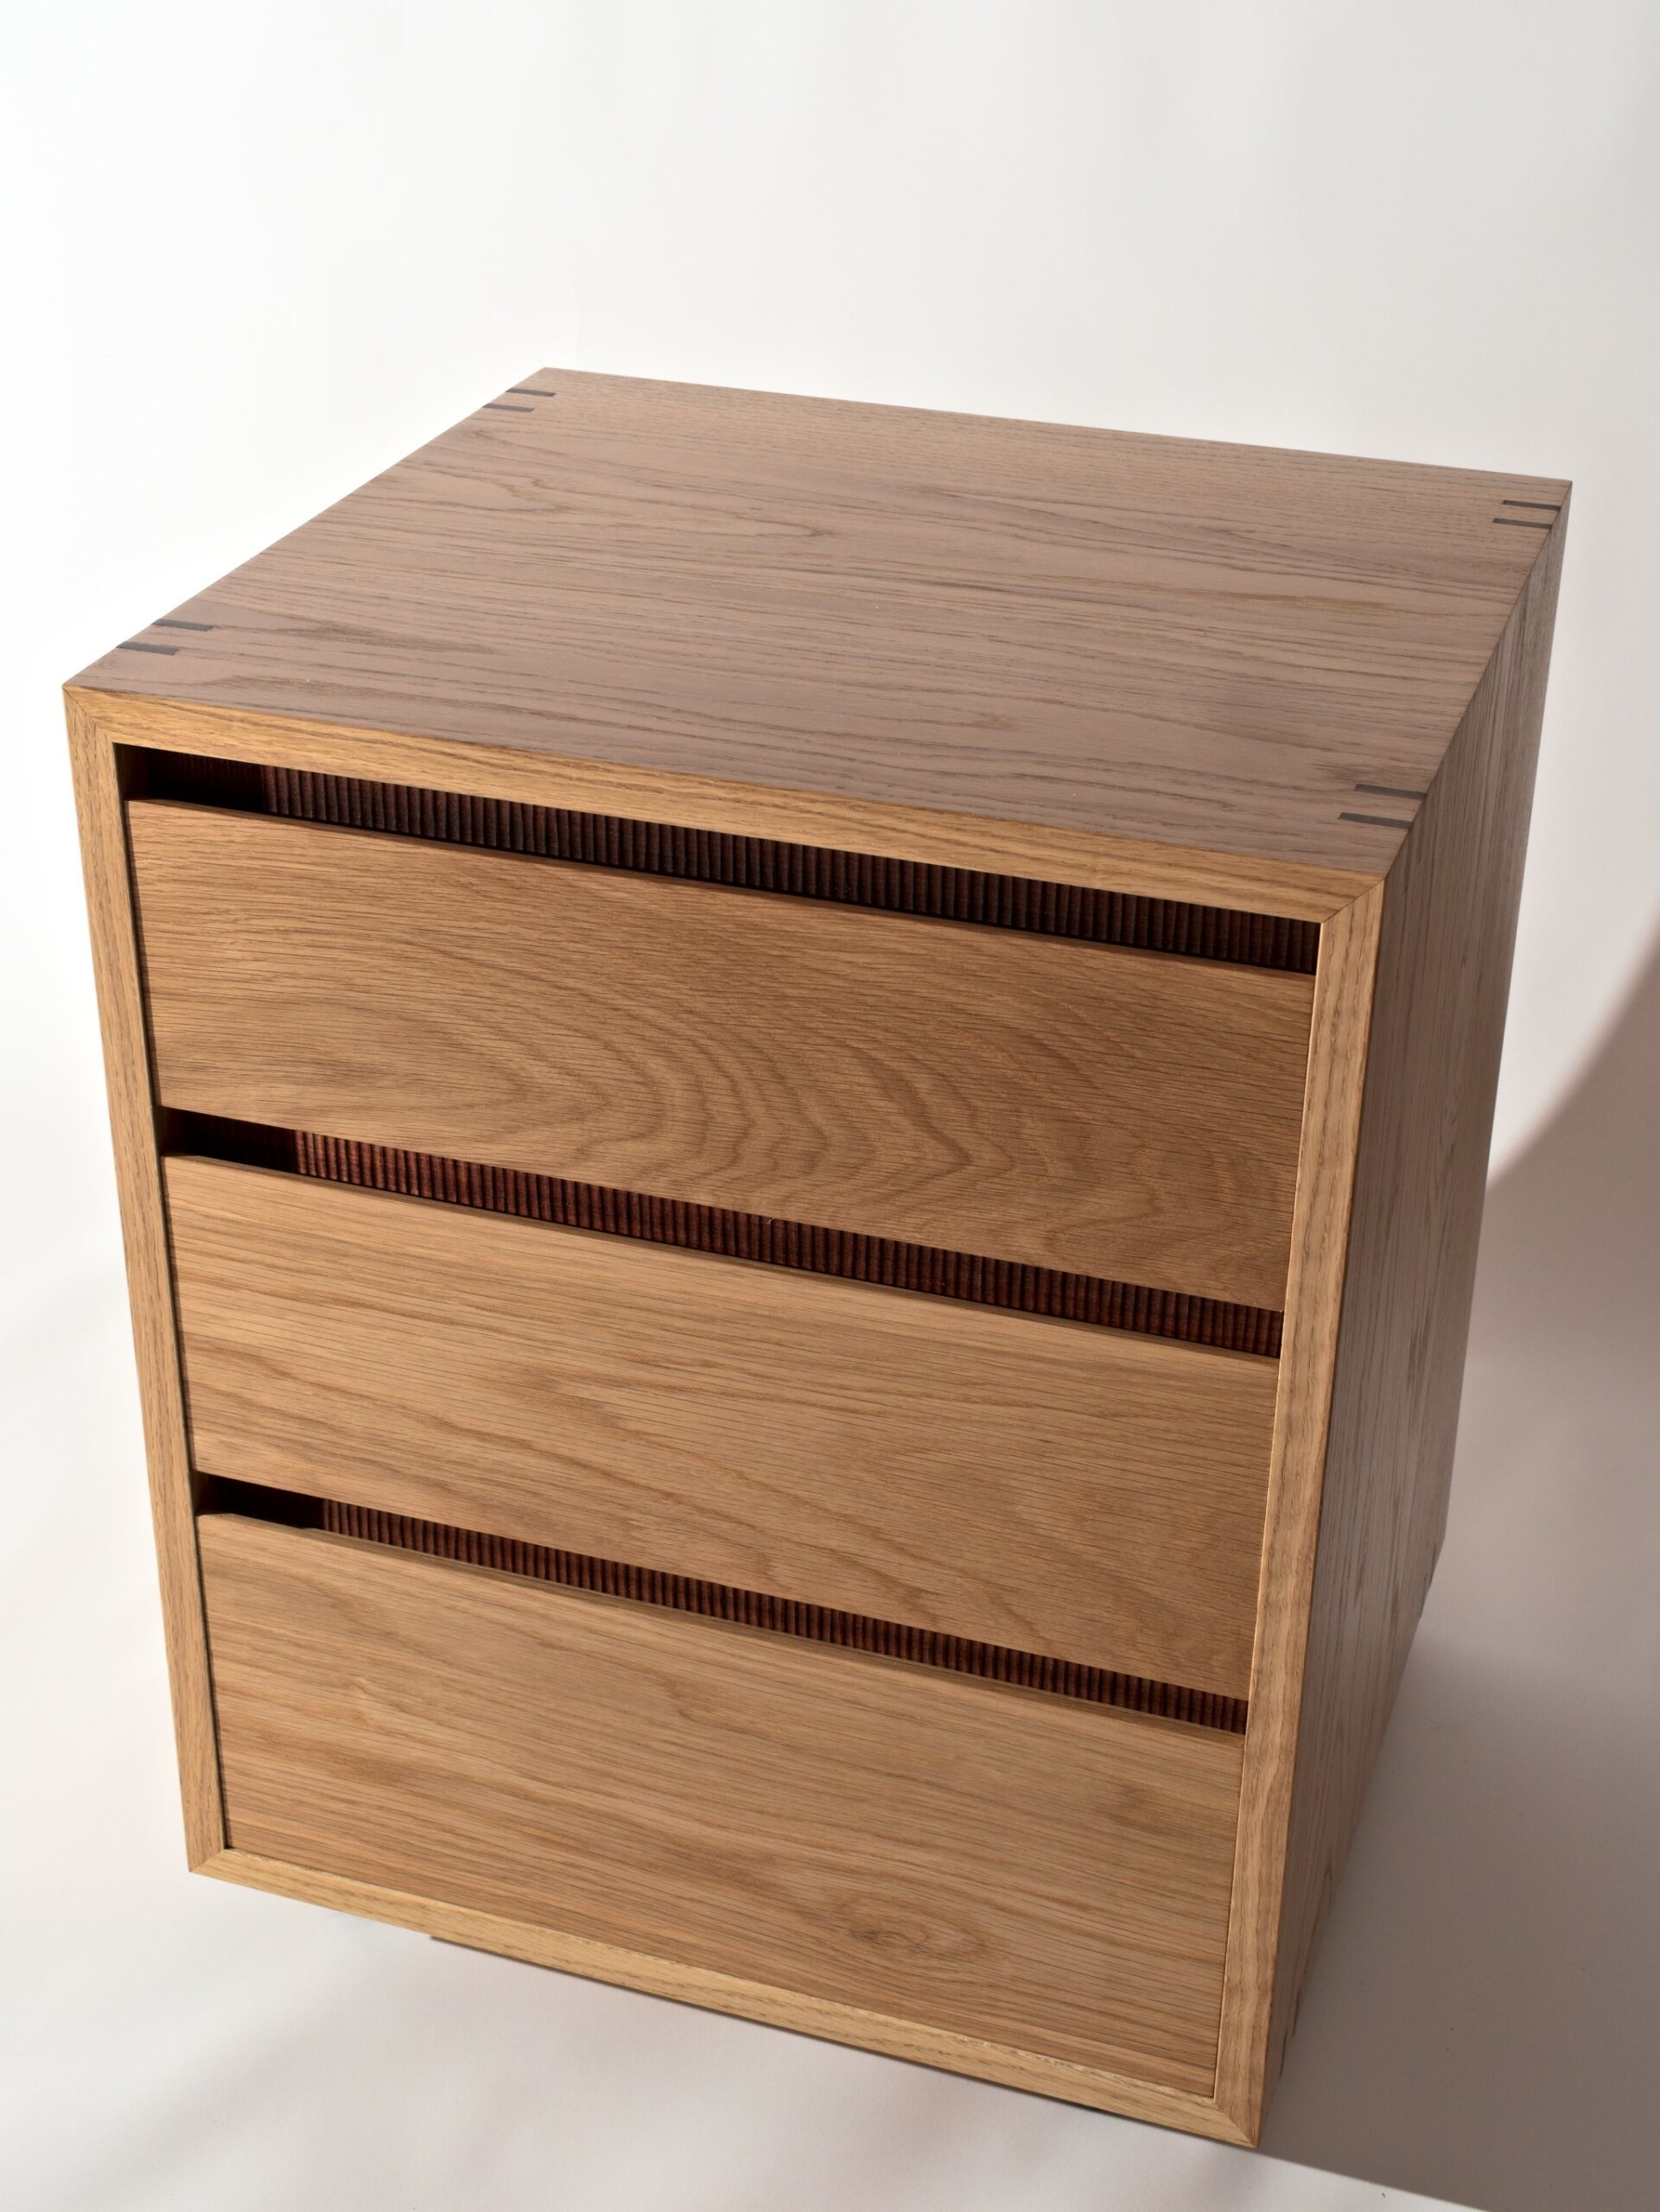 Melissa Handmade Drawers With Joinery Detail